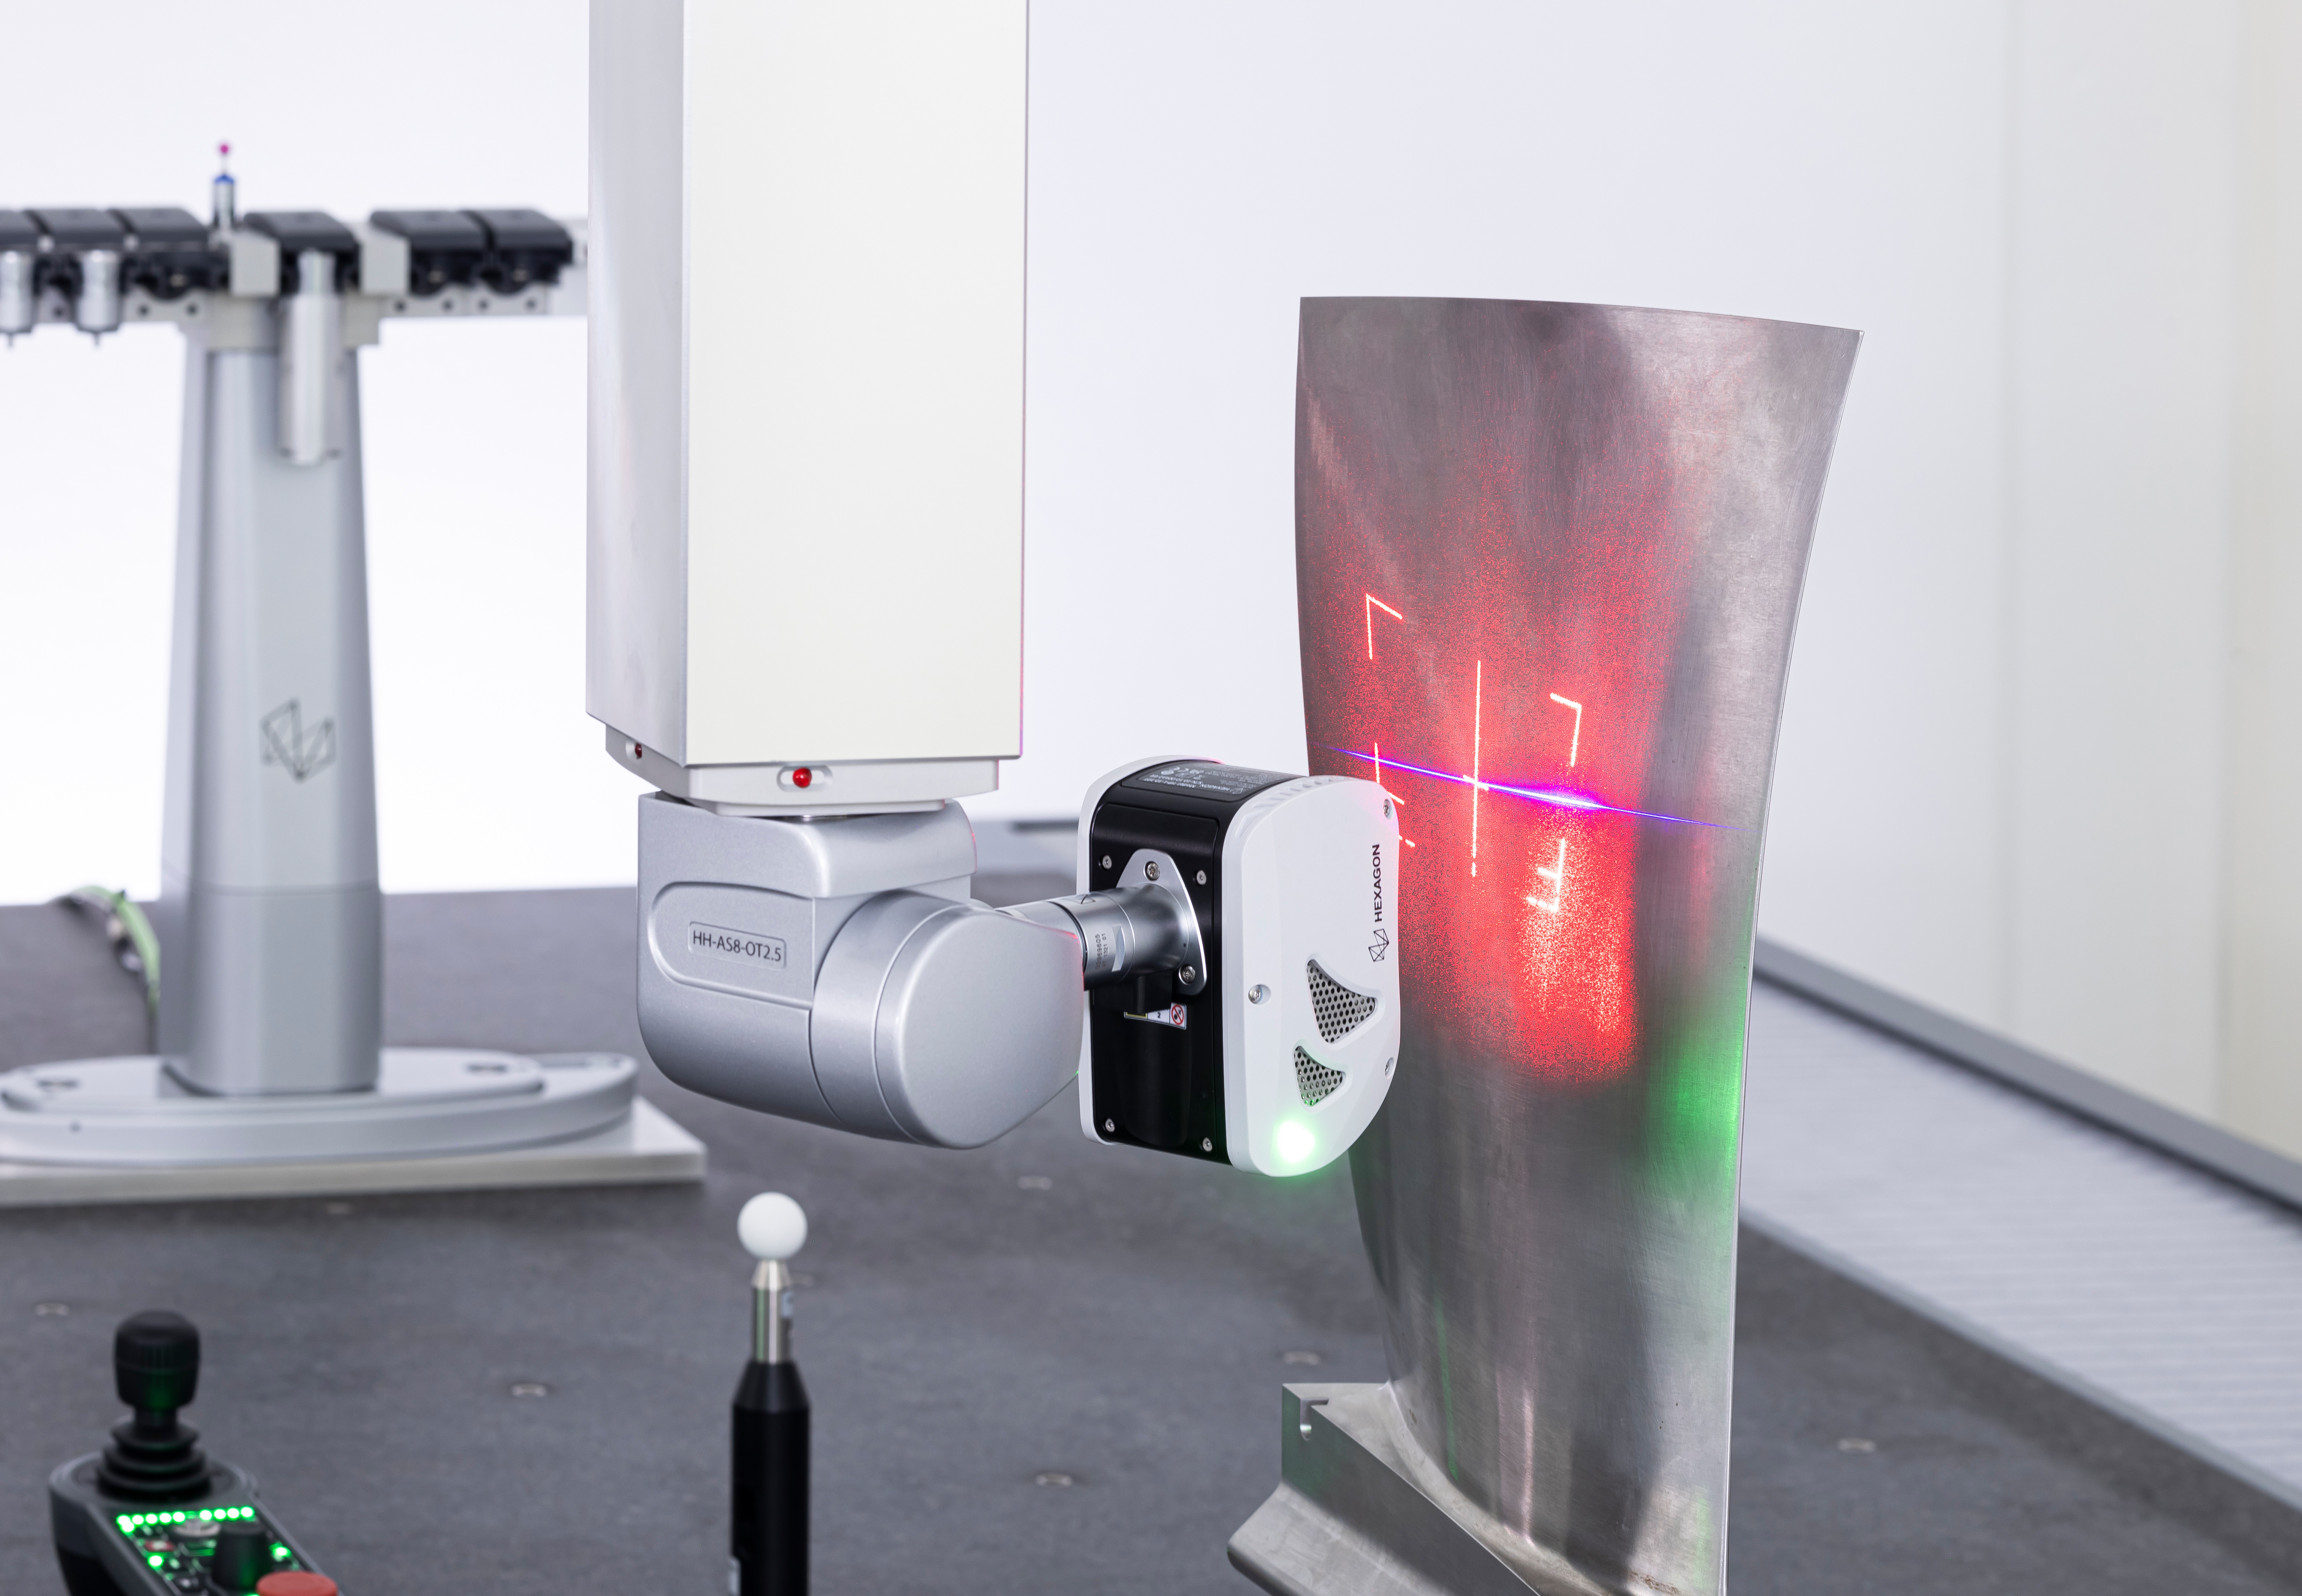 Laser scanning sensor mounted on an automatic probe head